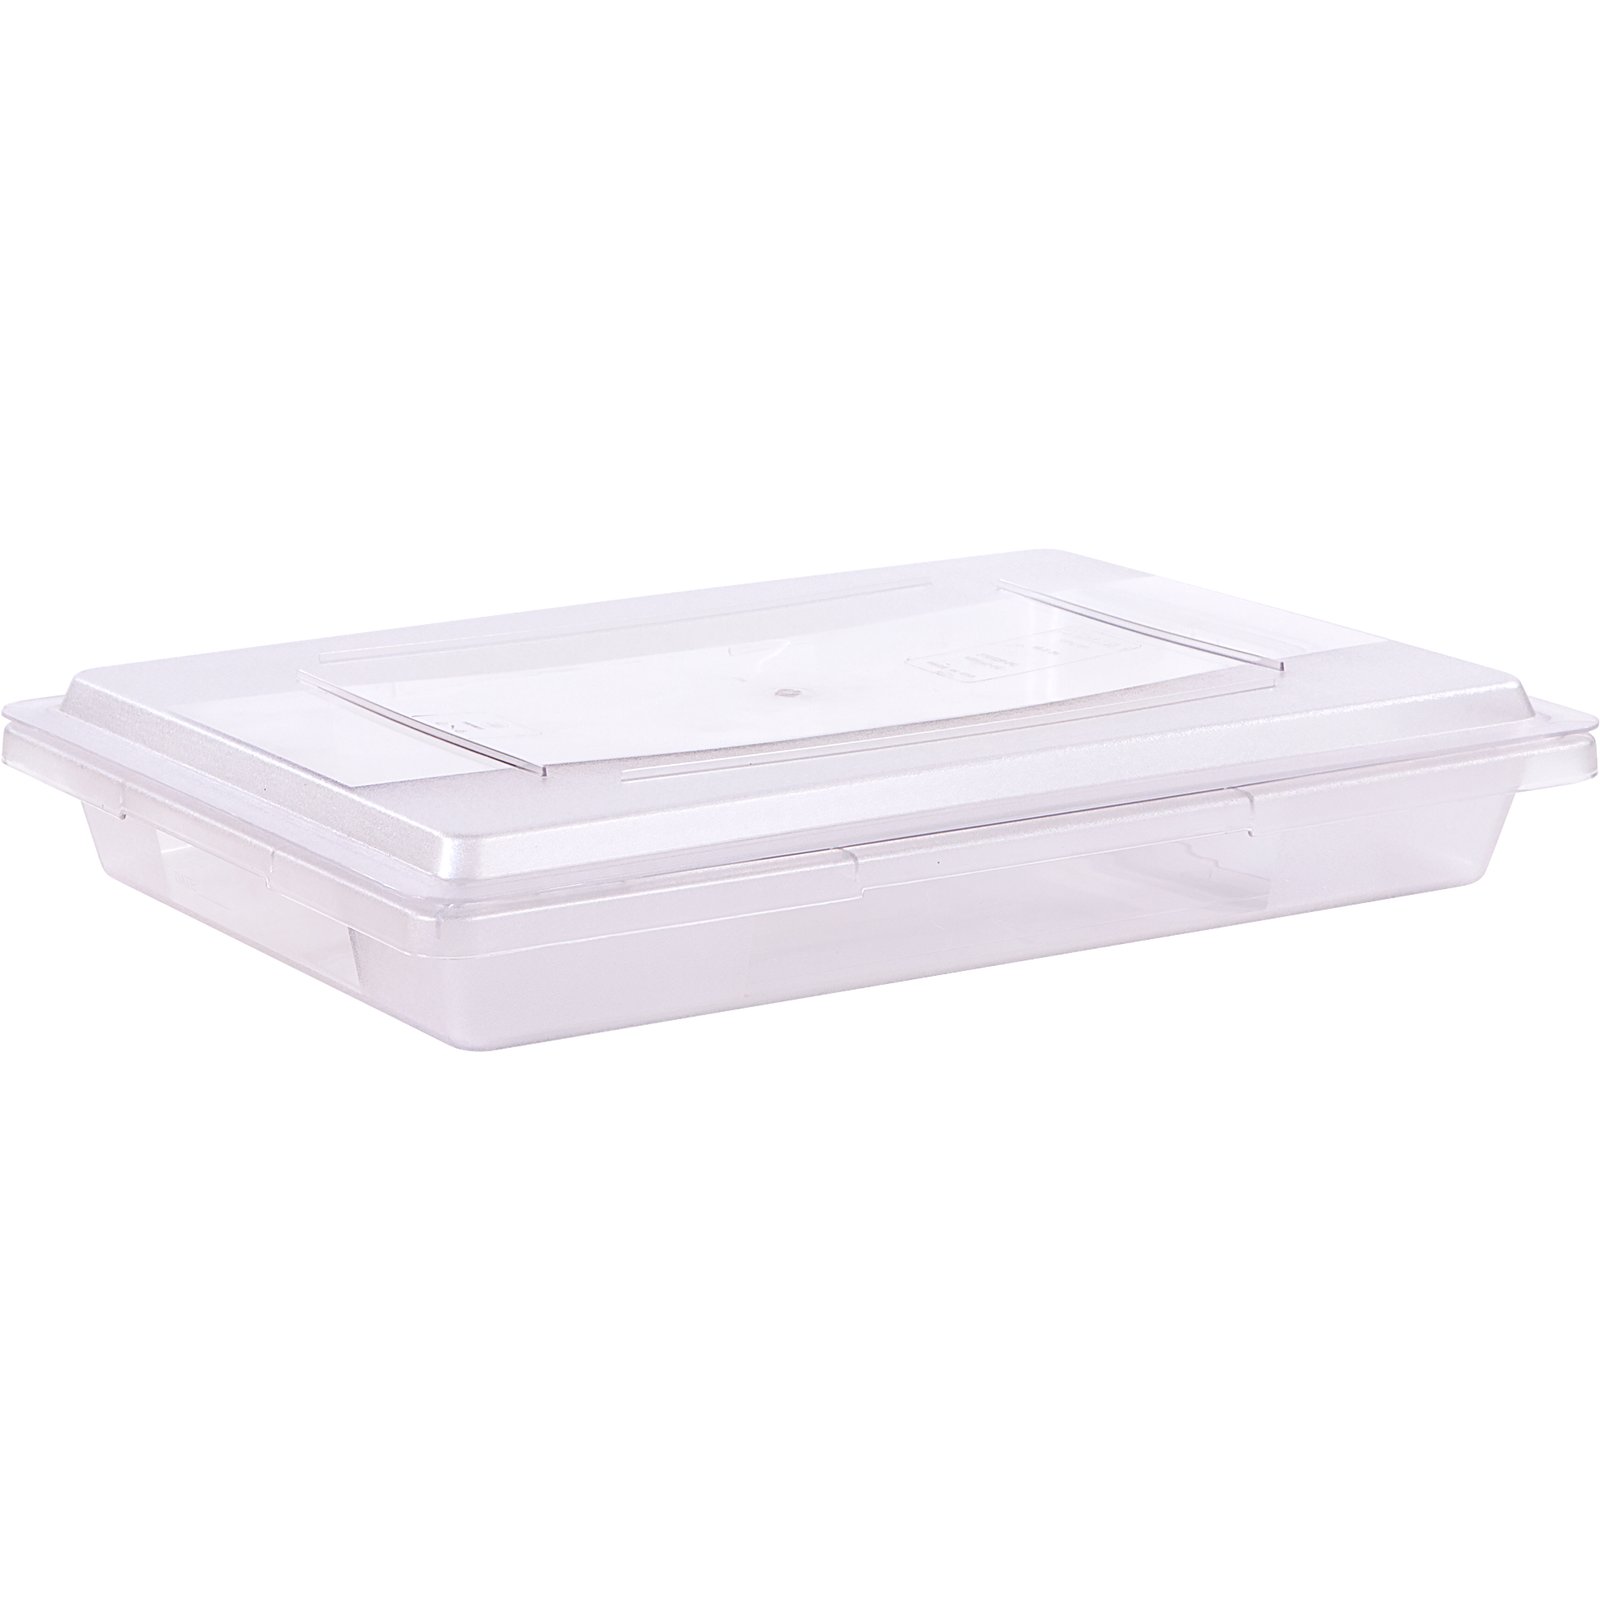 Vigor 26 x 18 x 9 Clear Polycarbonate Food Storage Box with Lid - 6/Pack